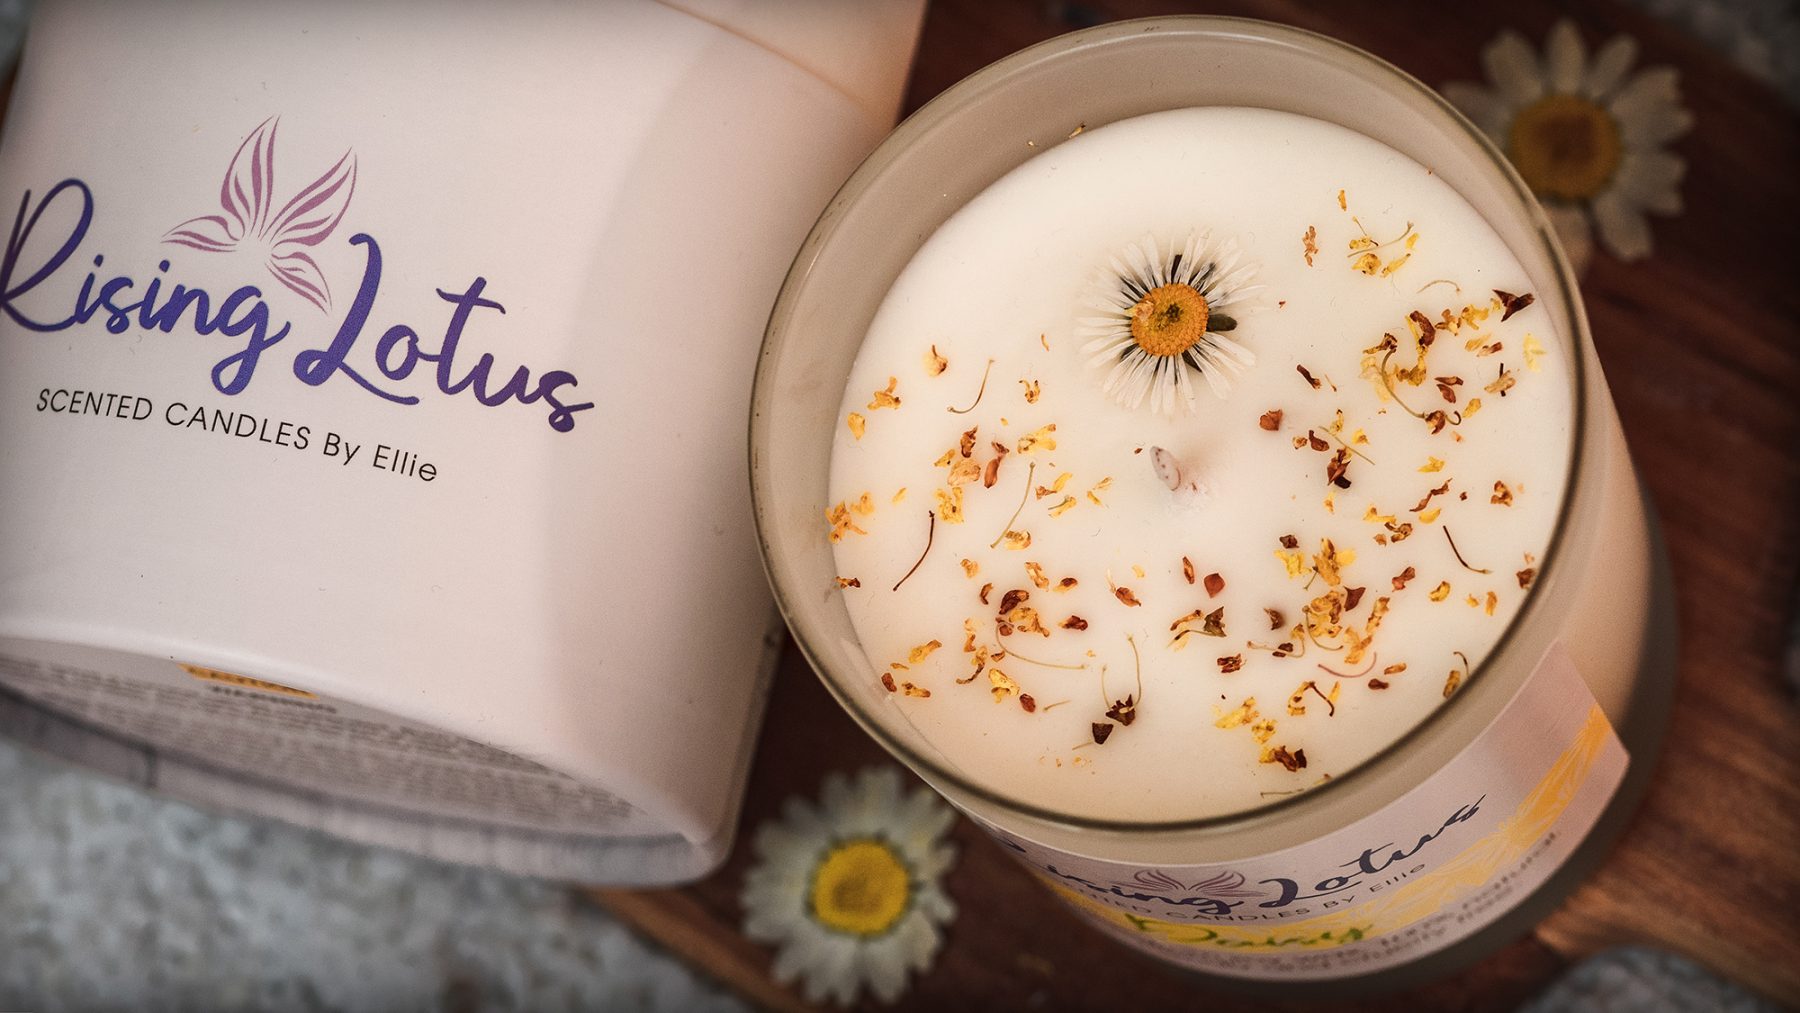 Floral scented daisy fragrance soy wax candle